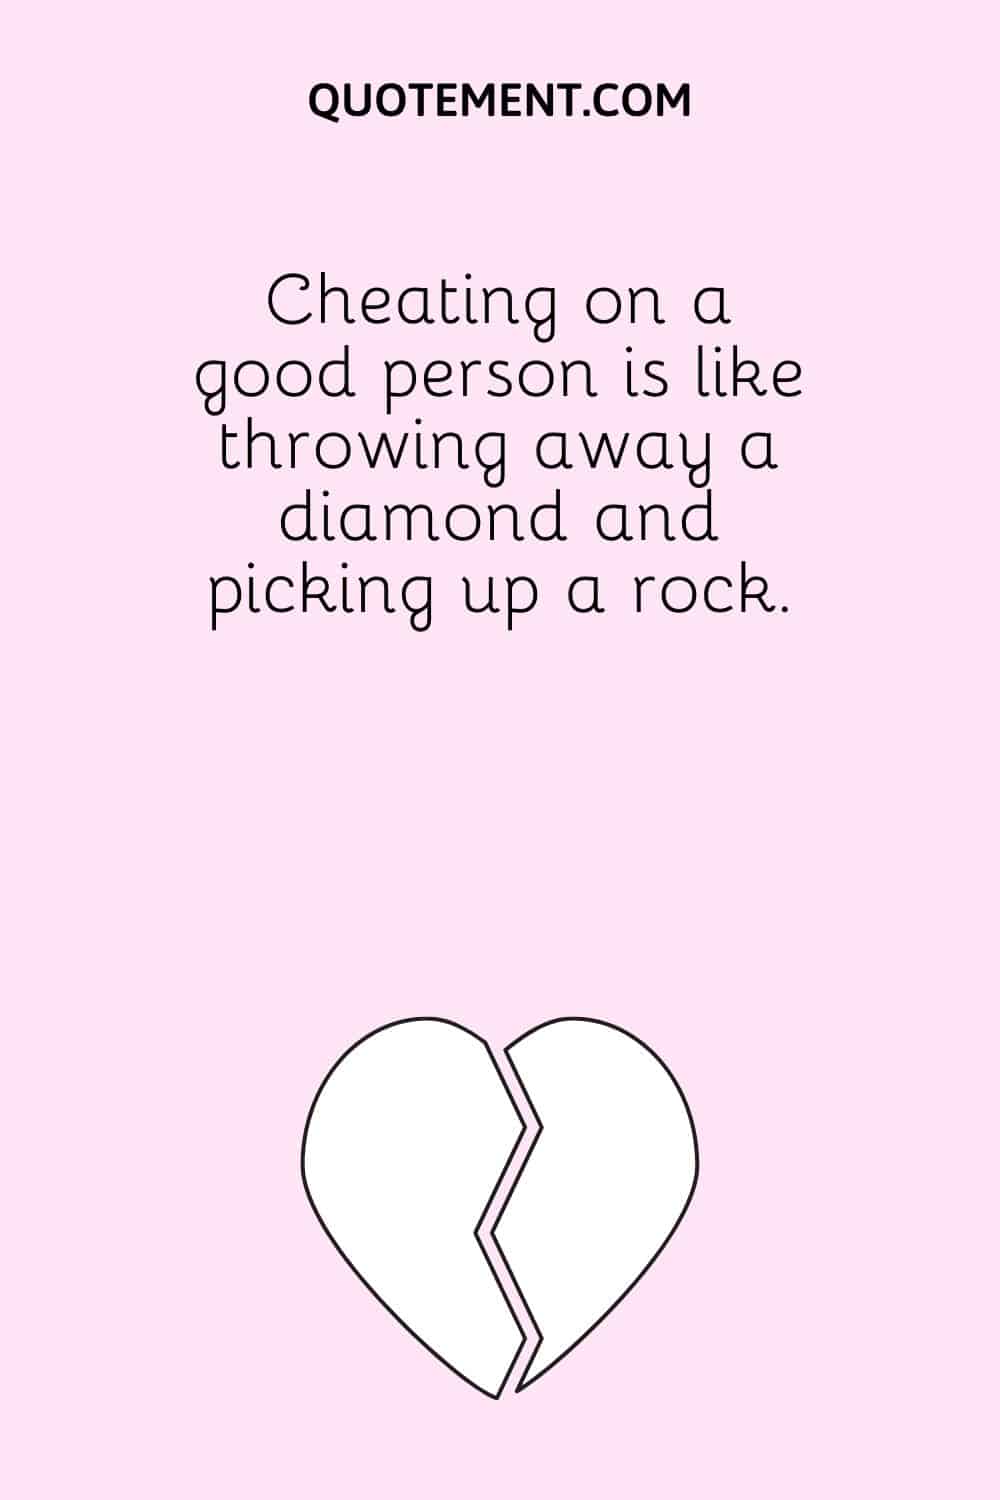 Cheating on a good person is like throwing away a diamond and picking up a rock.